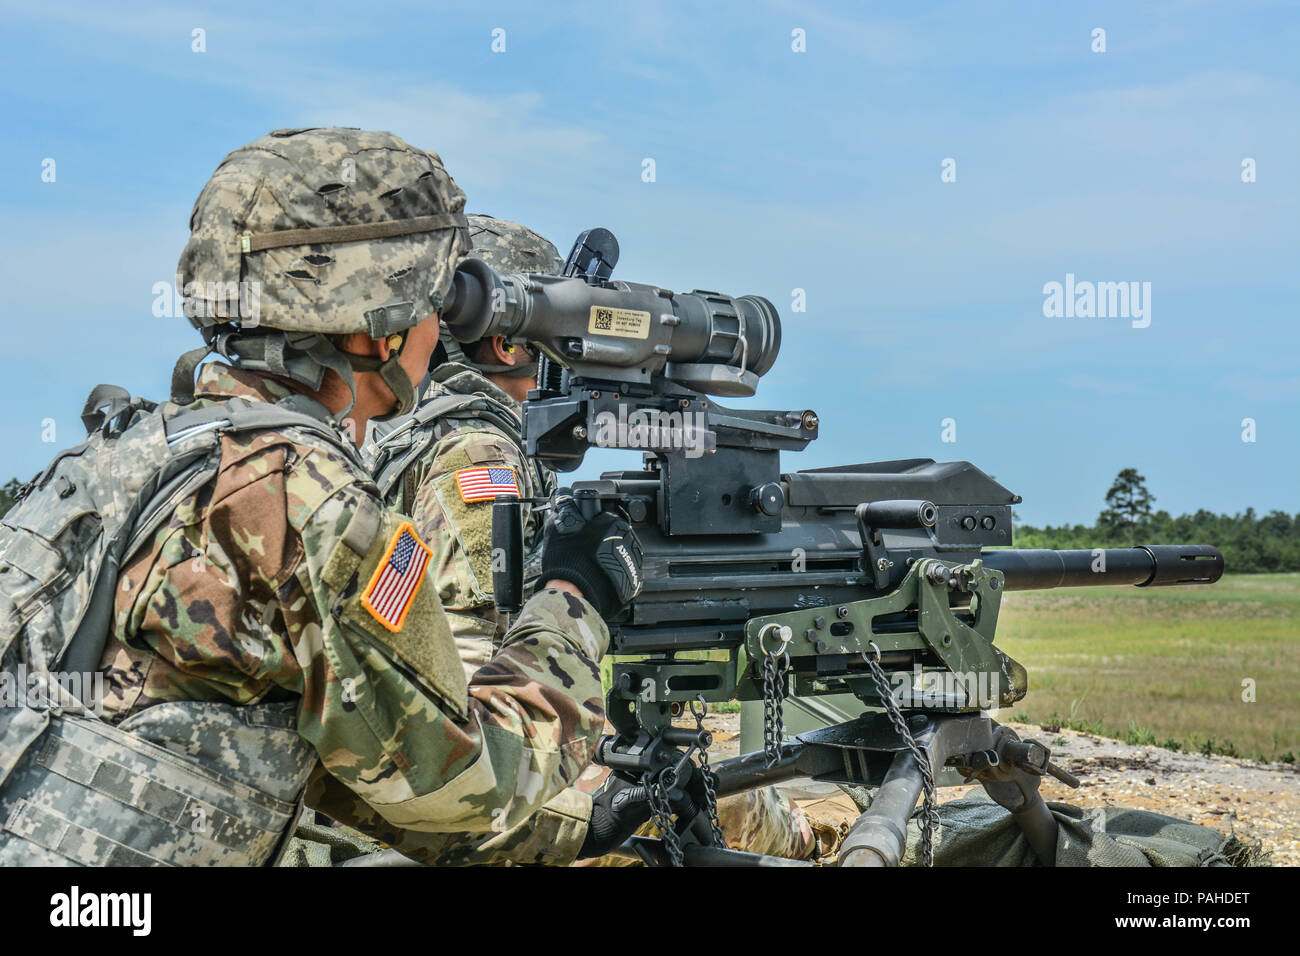 U.S. Army Reserve Troop List Unit Soldiers qualify with a Mark 19 40 mm grenade gun during Operation Cold Steel II, hosted by U.S. Army Civil Affairs and Psychological Operations Command (Airborne), July 13, 2018 at Joint Base McGuire-Dix-Lakehurst, N.J. Operation Cold Steel is the U.S. Army Reserve's crew-served weapons qualification and validation exercise to ensure America's Army Reserve units and Soldiers are trained and ready to deploy on short notice as part of Ready Force X and bring combat-ready and lethal firepower in support of the Army and our joint partners anywhere around the worl Stock Photo